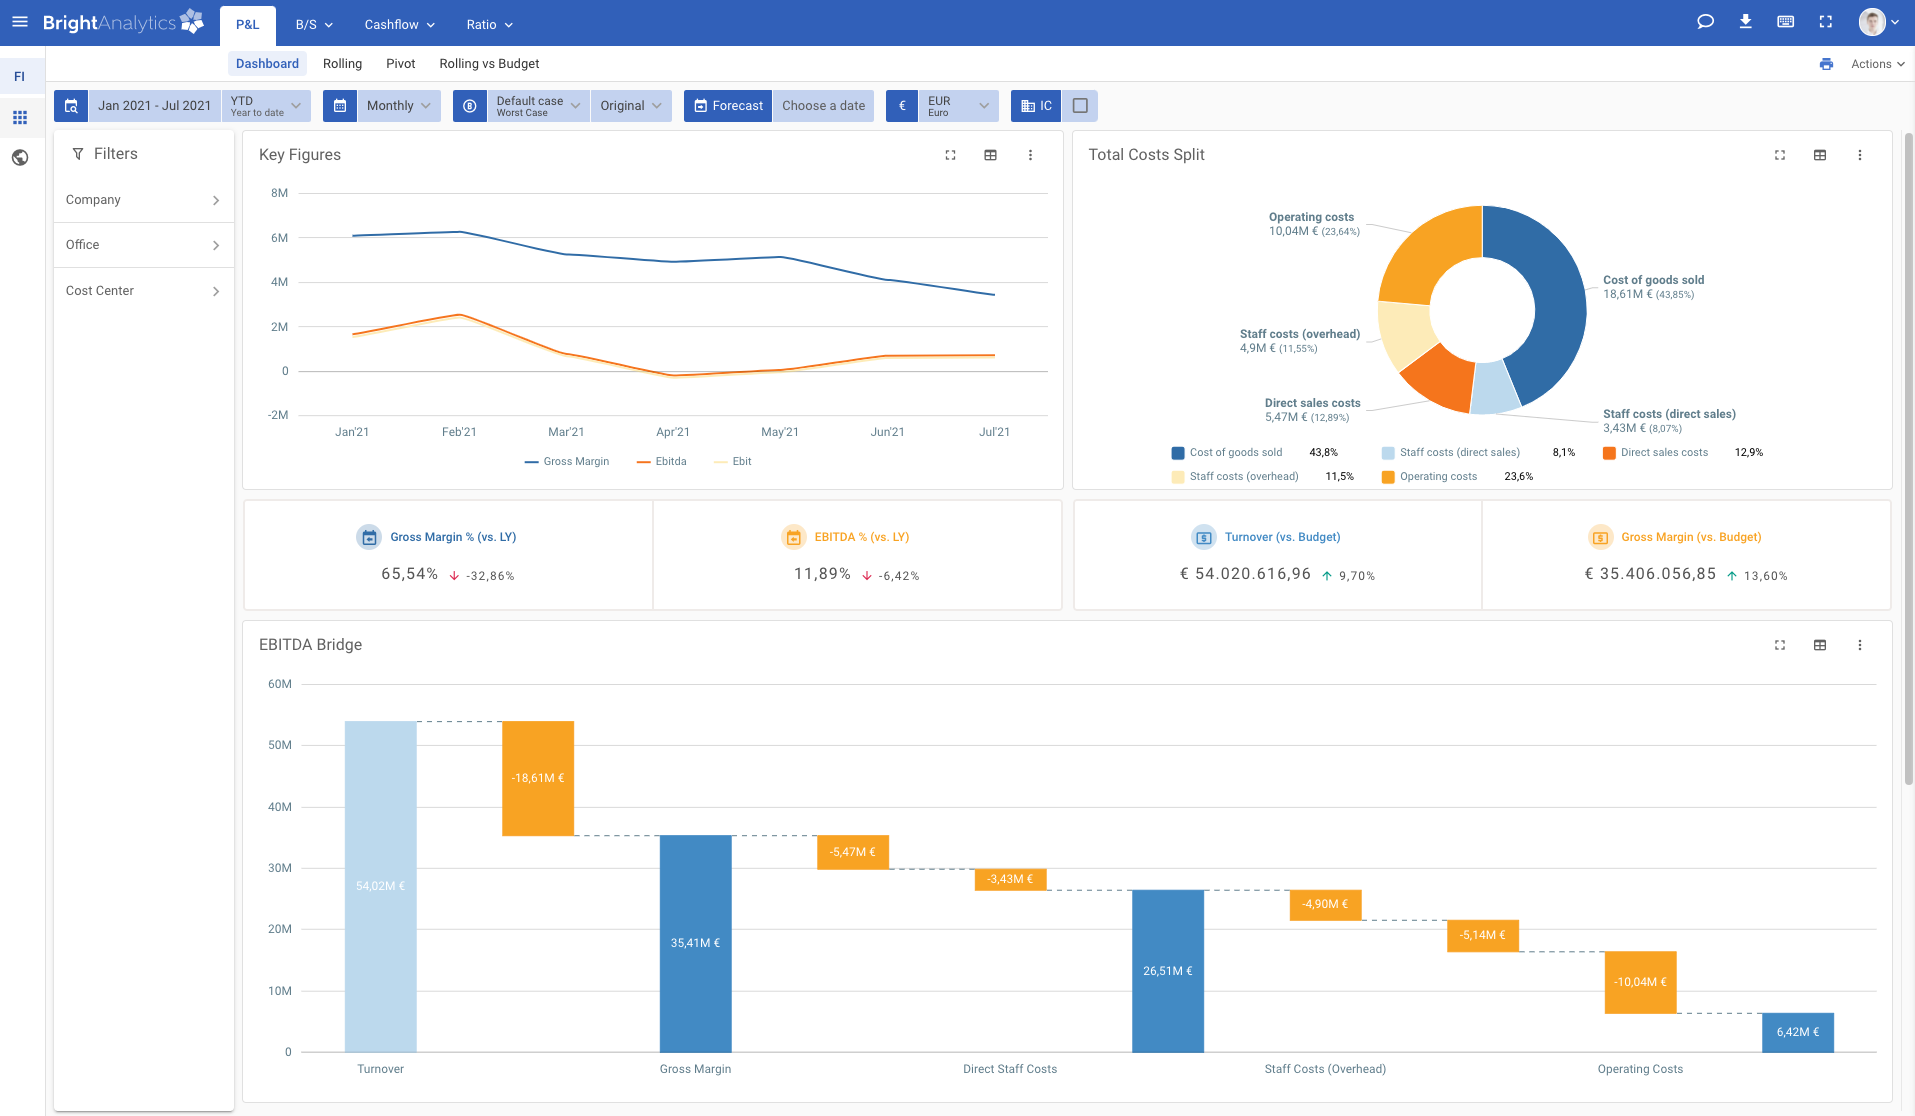 LucaNet alternative - Intuitive and user-friendly interface of BrightAnalytics